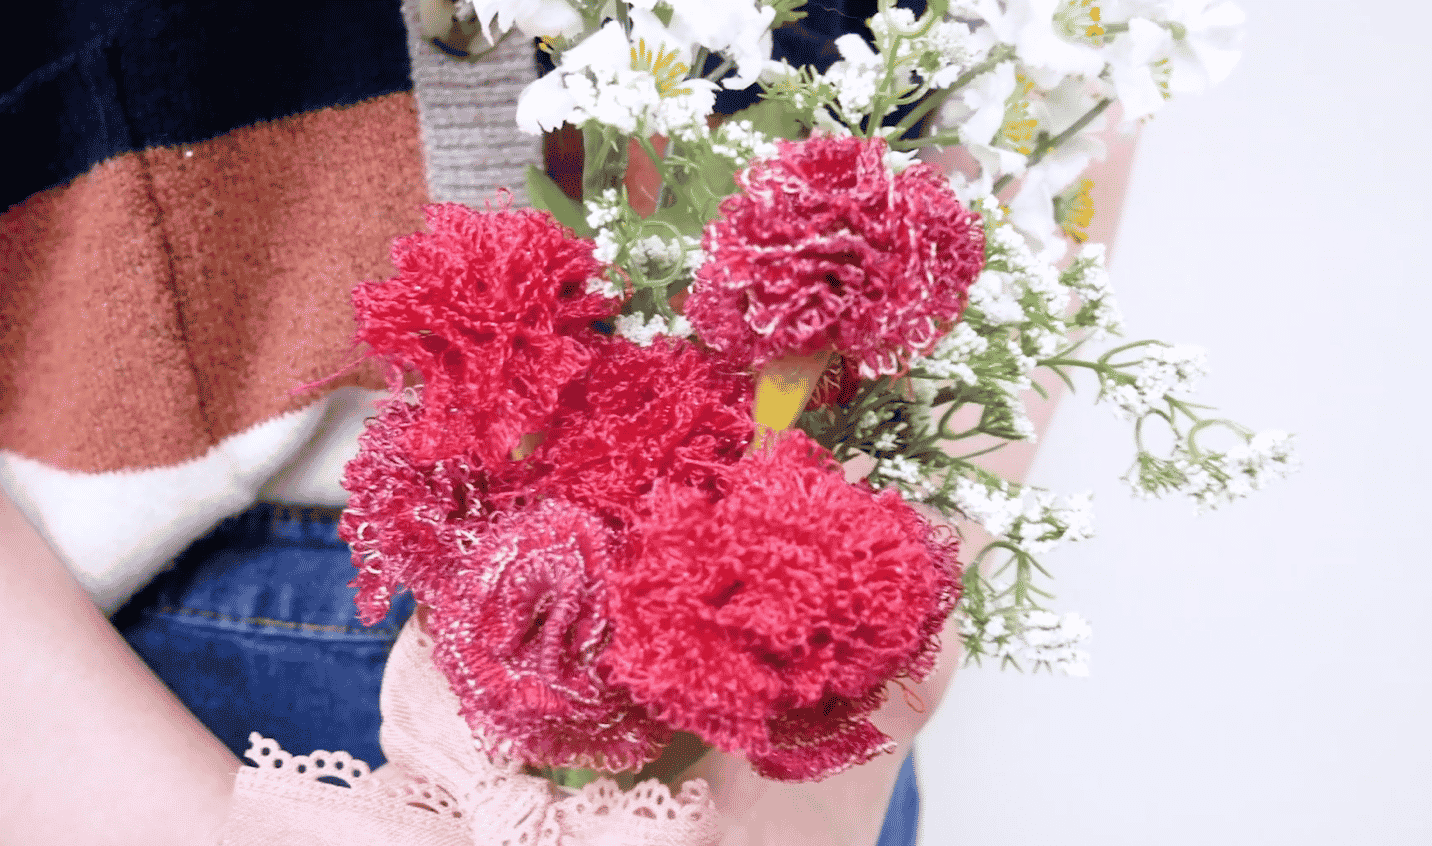 A person holding a bouquet of flowers

Description automatically generated with medium confidence